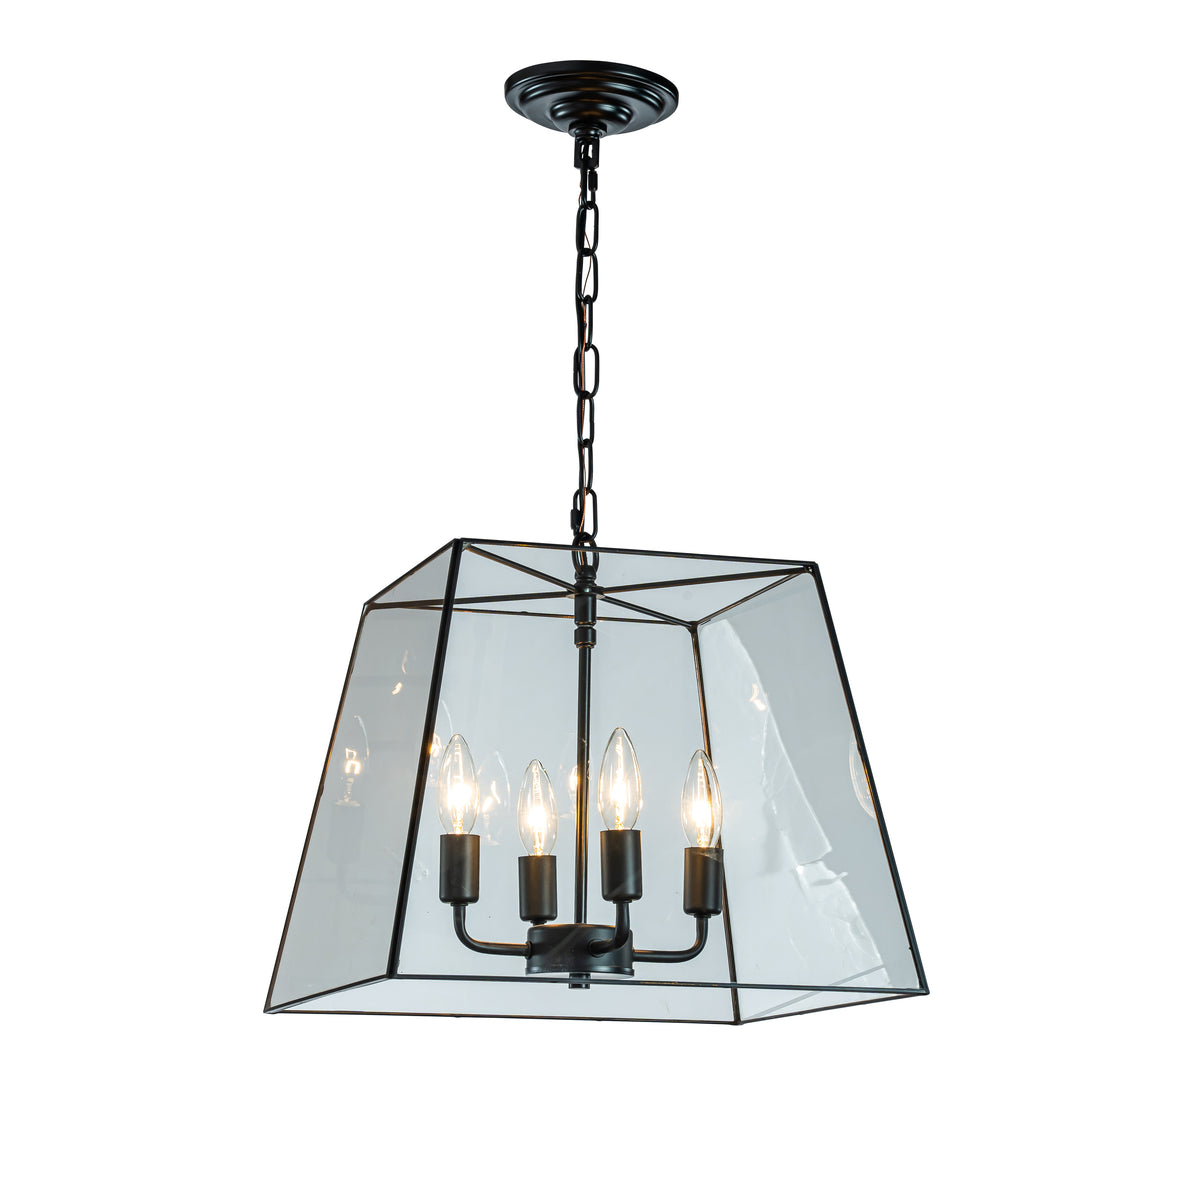 Minimalist Angled Ceiling Lantern Black Chandelier with Clear Glass Shade